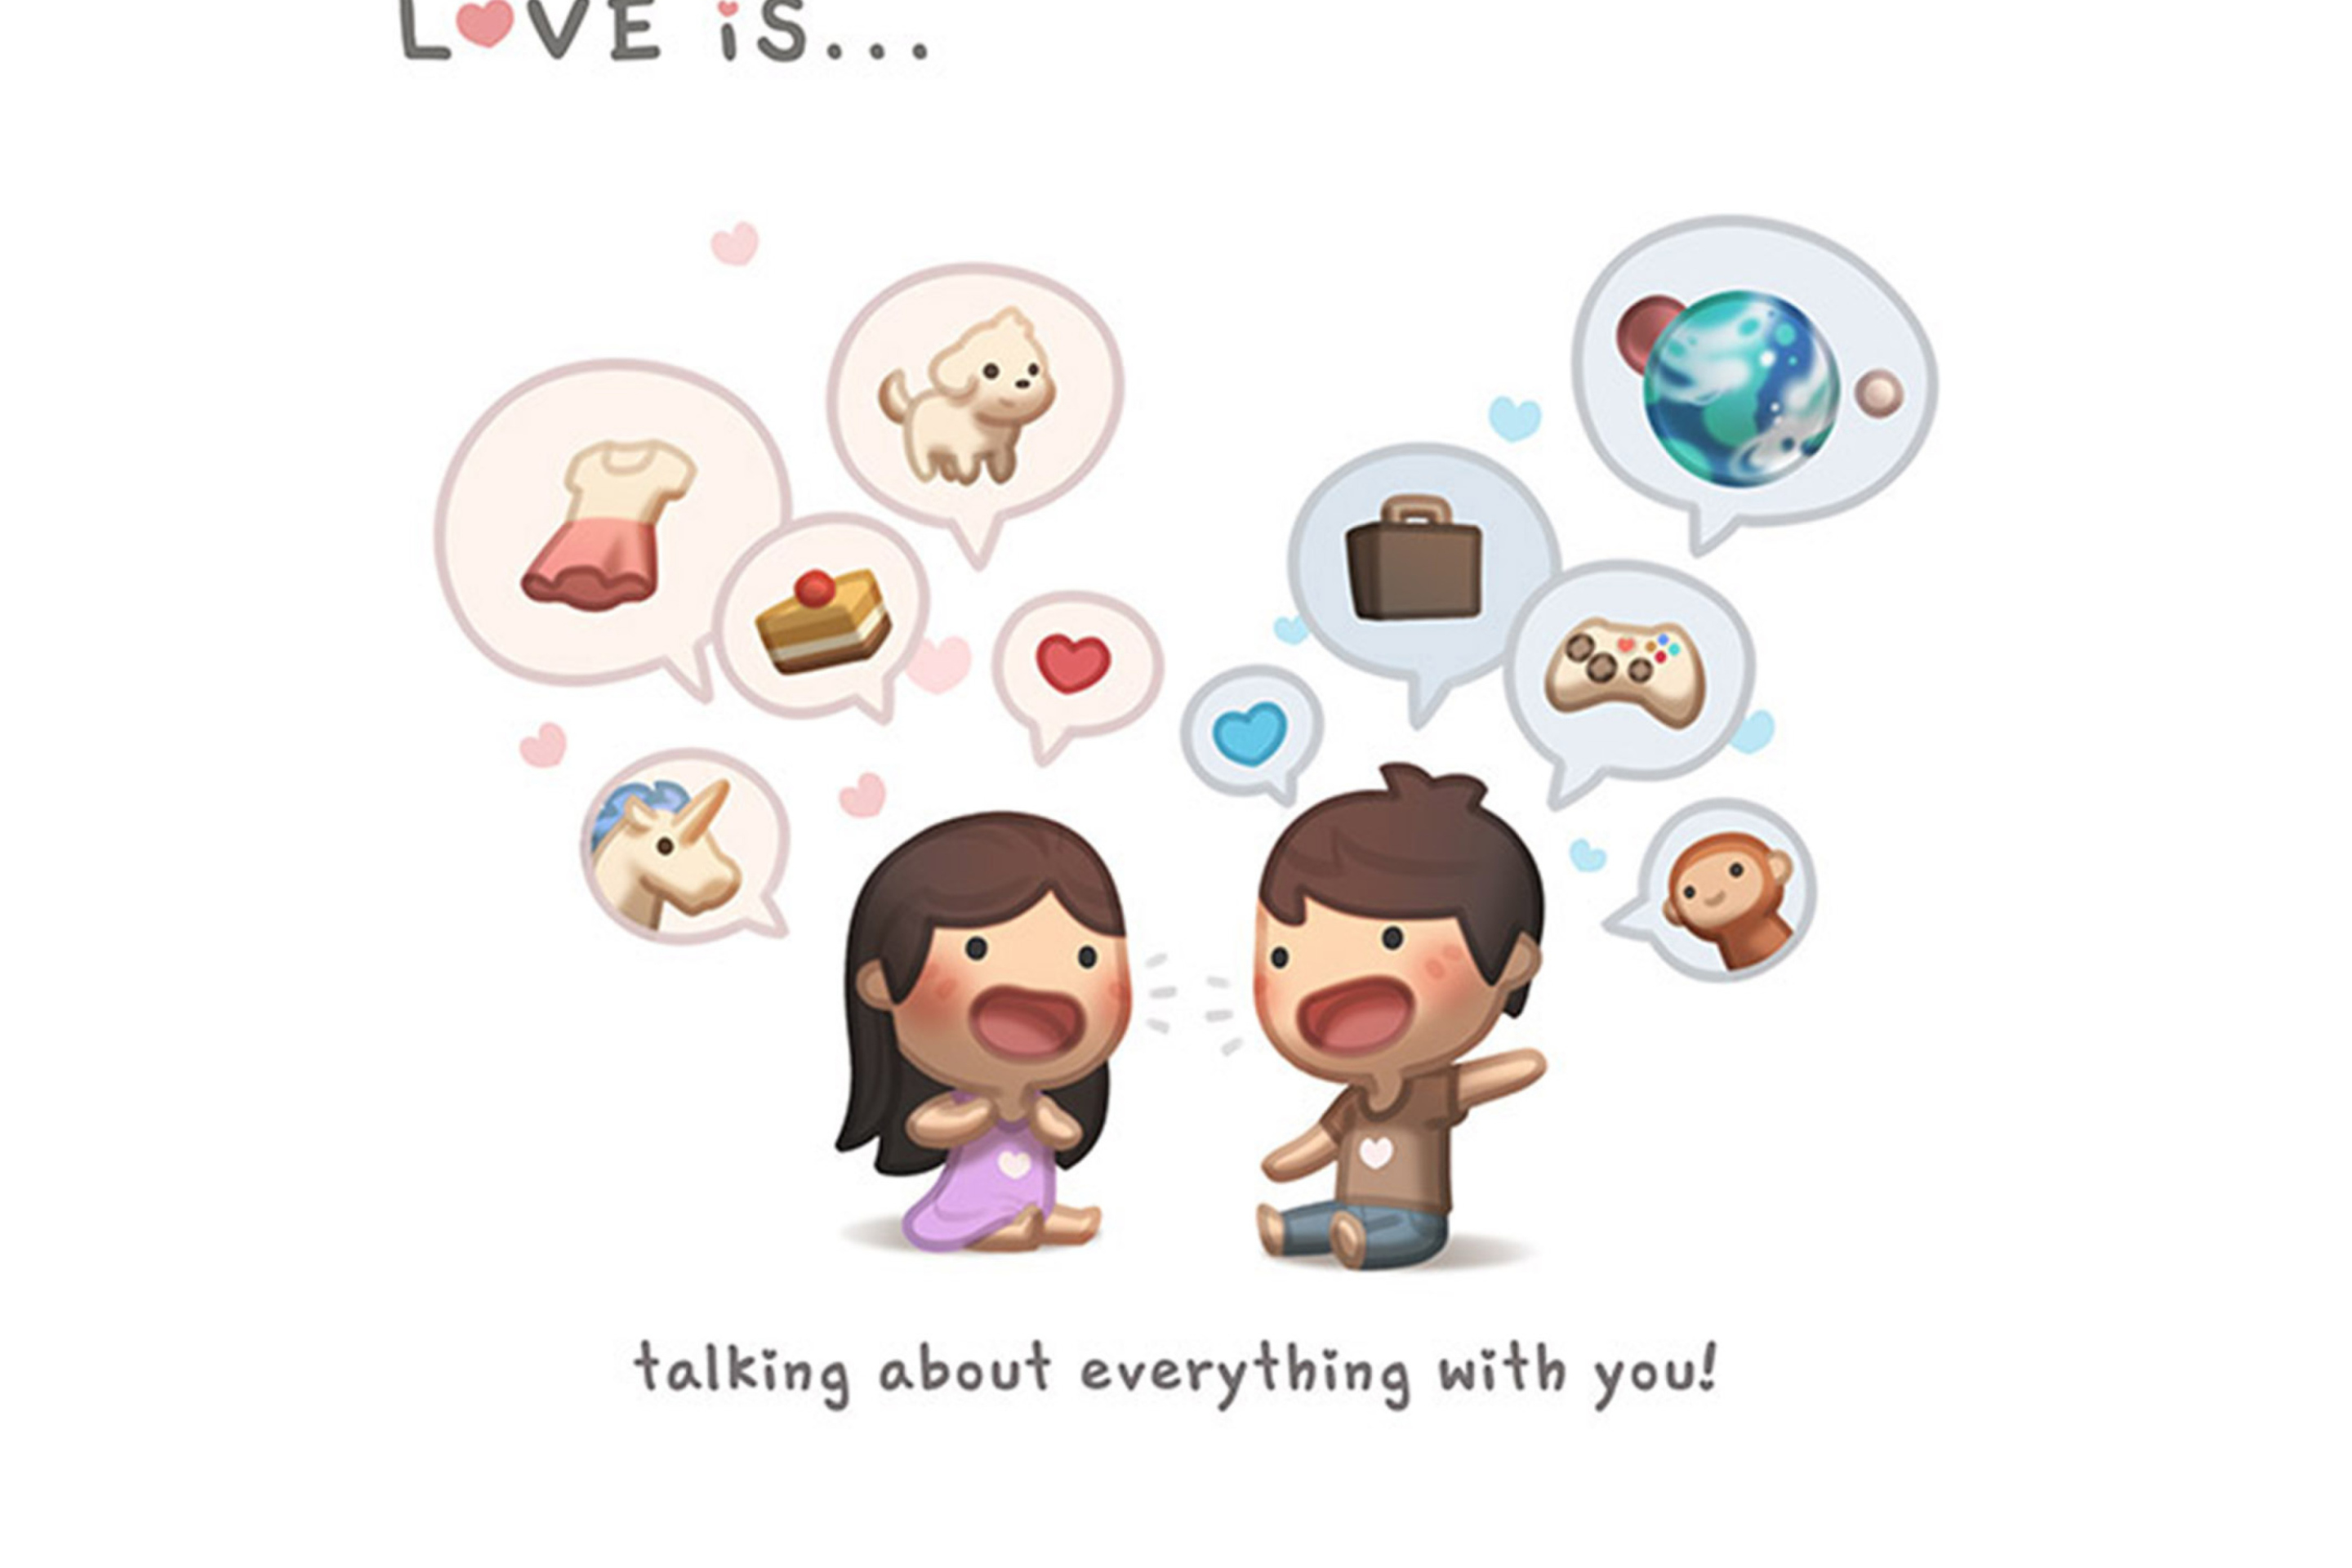 Das Love Is - Talking About Everything With You Wallpaper 2880x1920